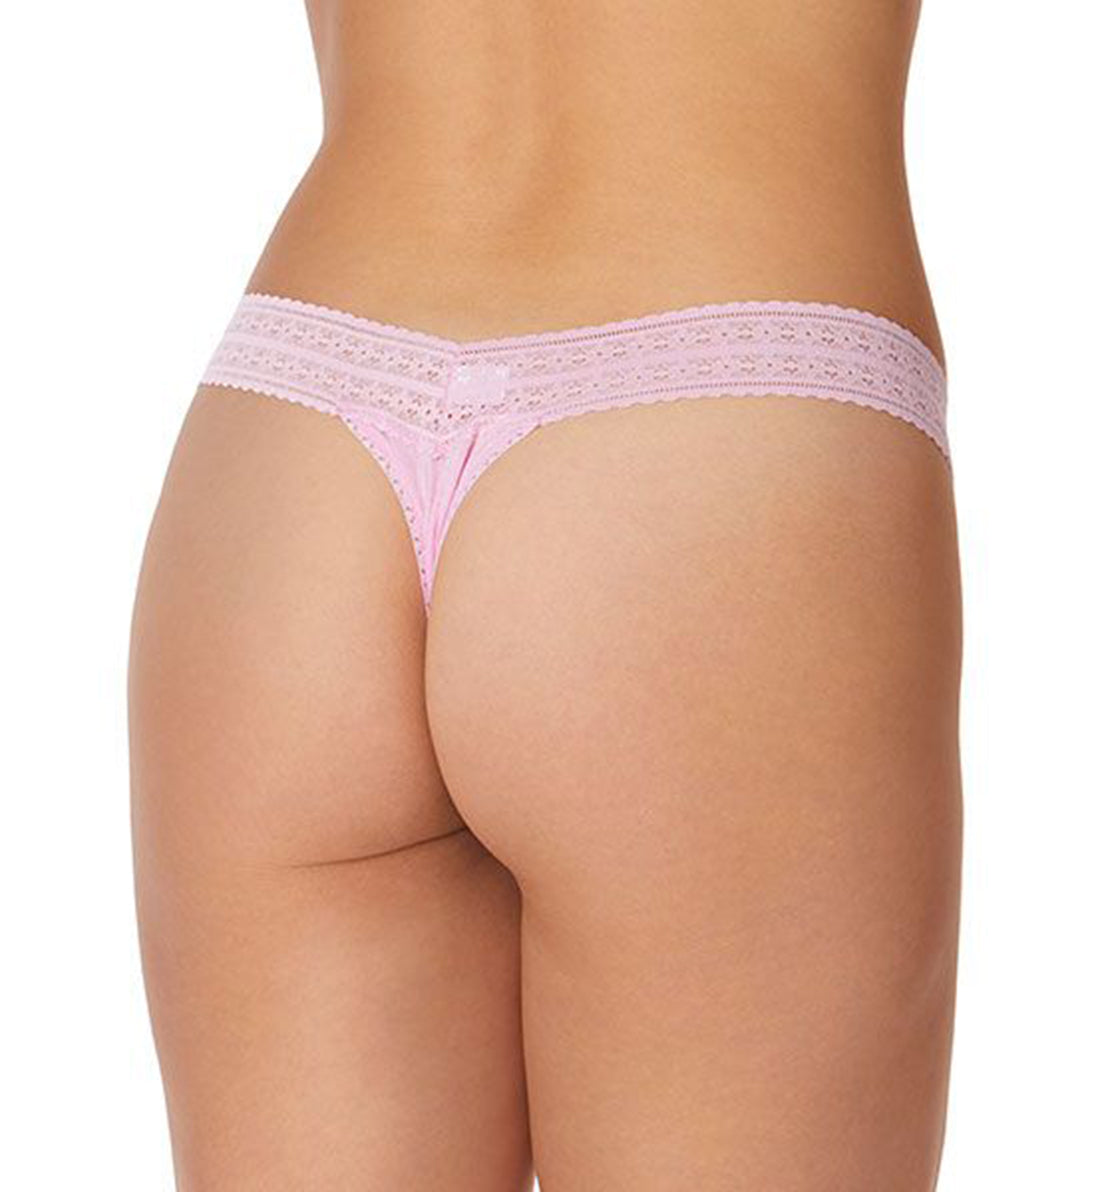 Hanky Panky DreamEase Low Rise Thong (631004),Cotton Candy Pink - Cotton Candy Pink,One Size